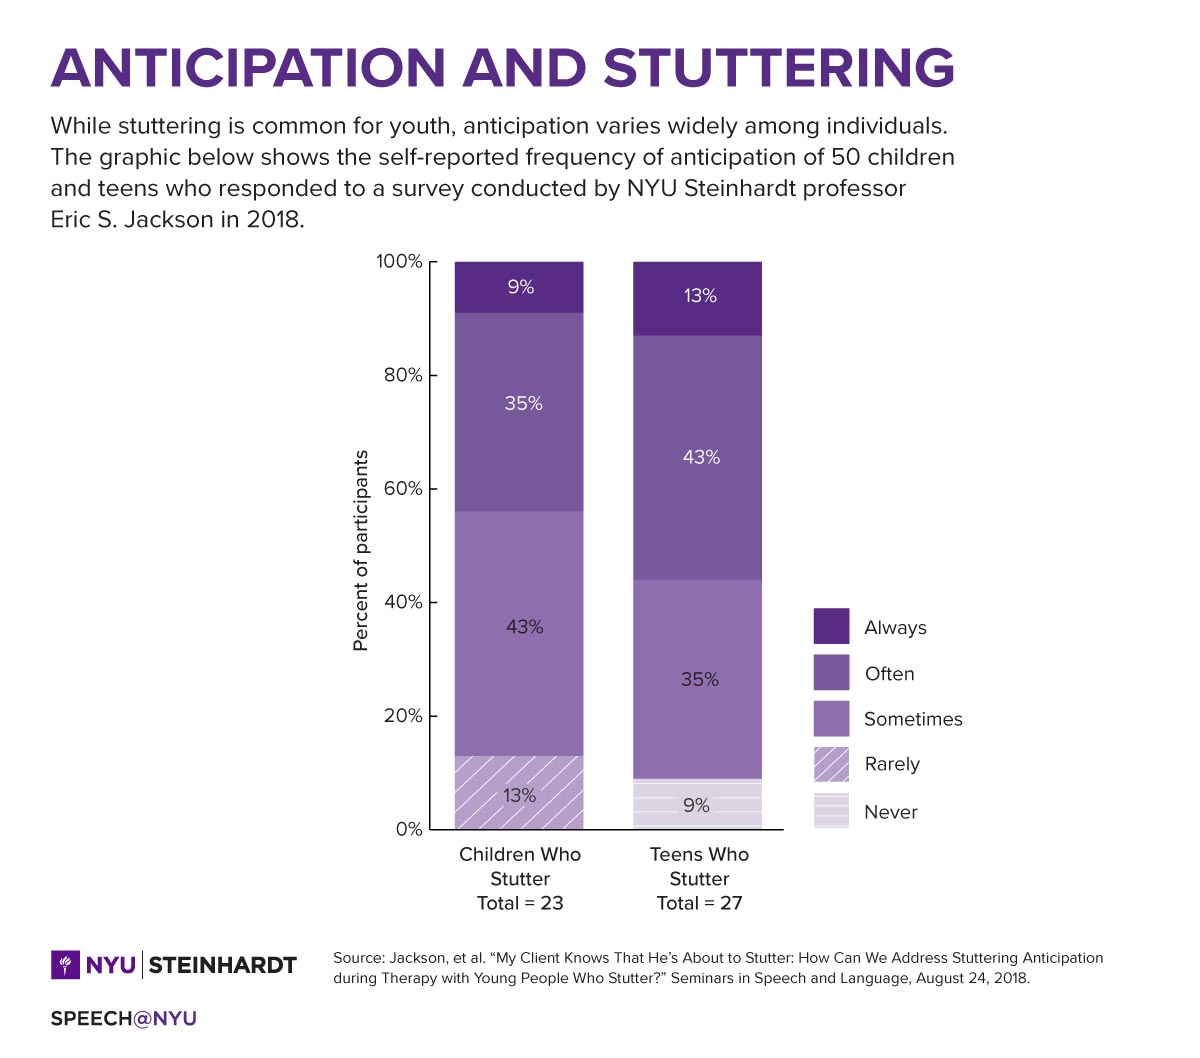 Bar chart comparing percent of children and teens who stutter with link to text version below.